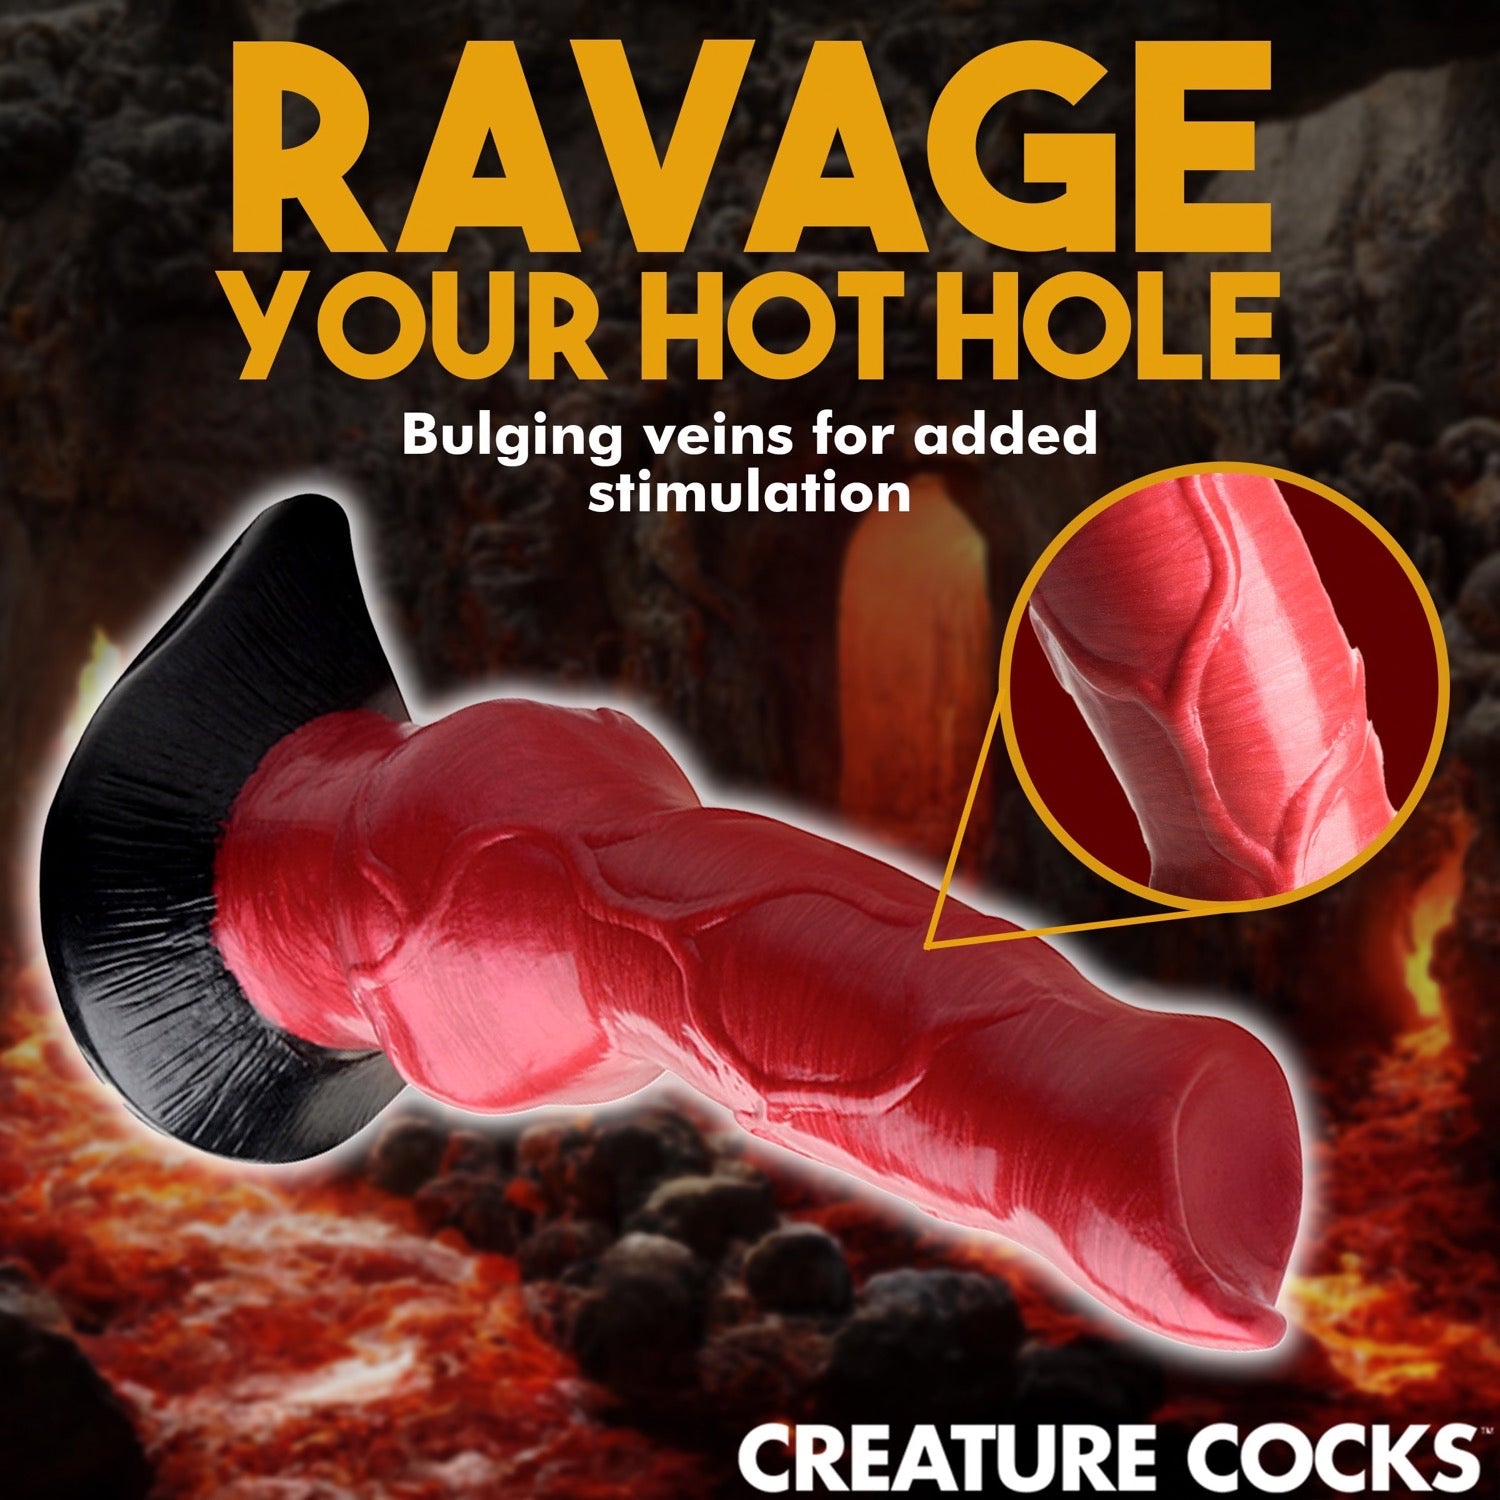 Creature Cocks Hell-Hound Canine Penis Silicone 7.5&quot; Dildo by XR Brands